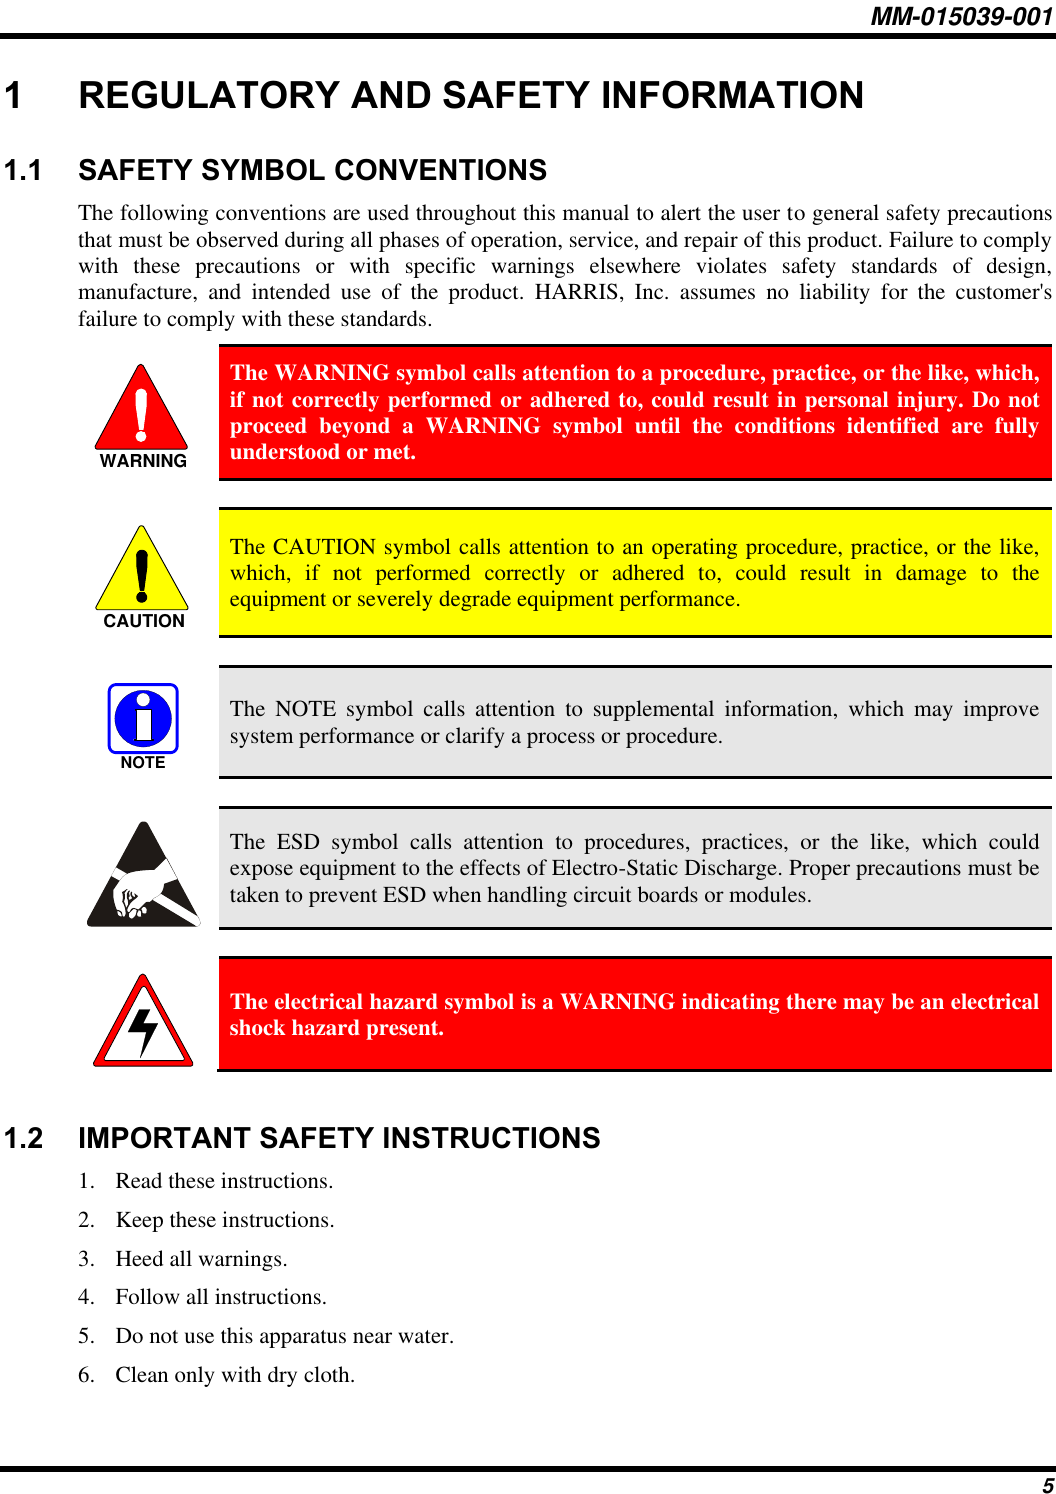 MM-015039-001 5 1 REGULATORY AND SAFETY INFORMATION 1.1 SAFETY SYMBOL CONVENTIONS The following conventions are used throughout this manual to alert the user to general safety precautions that must be observed during all phases of operation, service, and repair of this product. Failure to comply with  these  precautions  or  with  specific  warnings  elsewhere  violates  safety  standards  of  design, manufacture,  and  intended  use  of  the  product.  HARRIS,  Inc.  assumes  no  liability  for  the  customer&apos;s failure to comply with these standards. WARNING The WARNING symbol calls attention to a procedure, practice, or the like, which, if not correctly performed or adhered to, could result in personal injury. Do not proceed  beyond  a  WARNING  symbol  until  the  conditions  identified  are  fully understood or met.   CAUTION The CAUTION symbol calls attention to an operating procedure, practice, or the like, which,  if  not  performed  correctly  or  adhered  to,  could  result  in  damage  to  the equipment or severely degrade equipment performance.   NOTE The  NOTE  symbol  calls  attention  to  supplemental  information,  which  may  improve system performance or clarify a process or procedure.    The  ESD  symbol  calls  attention  to  procedures,  practices,  or  the  like,  which  could expose equipment to the effects of Electro-Static Discharge. Proper precautions must be taken to prevent ESD when handling circuit boards or modules.    The electrical hazard symbol is a WARNING indicating there may be an electrical shock hazard present.  1.2 IMPORTANT SAFETY INSTRUCTIONS 1. Read these instructions. 2. Keep these instructions. 3. Heed all warnings. 4. Follow all instructions. 5. Do not use this apparatus near water. 6. Clean only with dry cloth. 